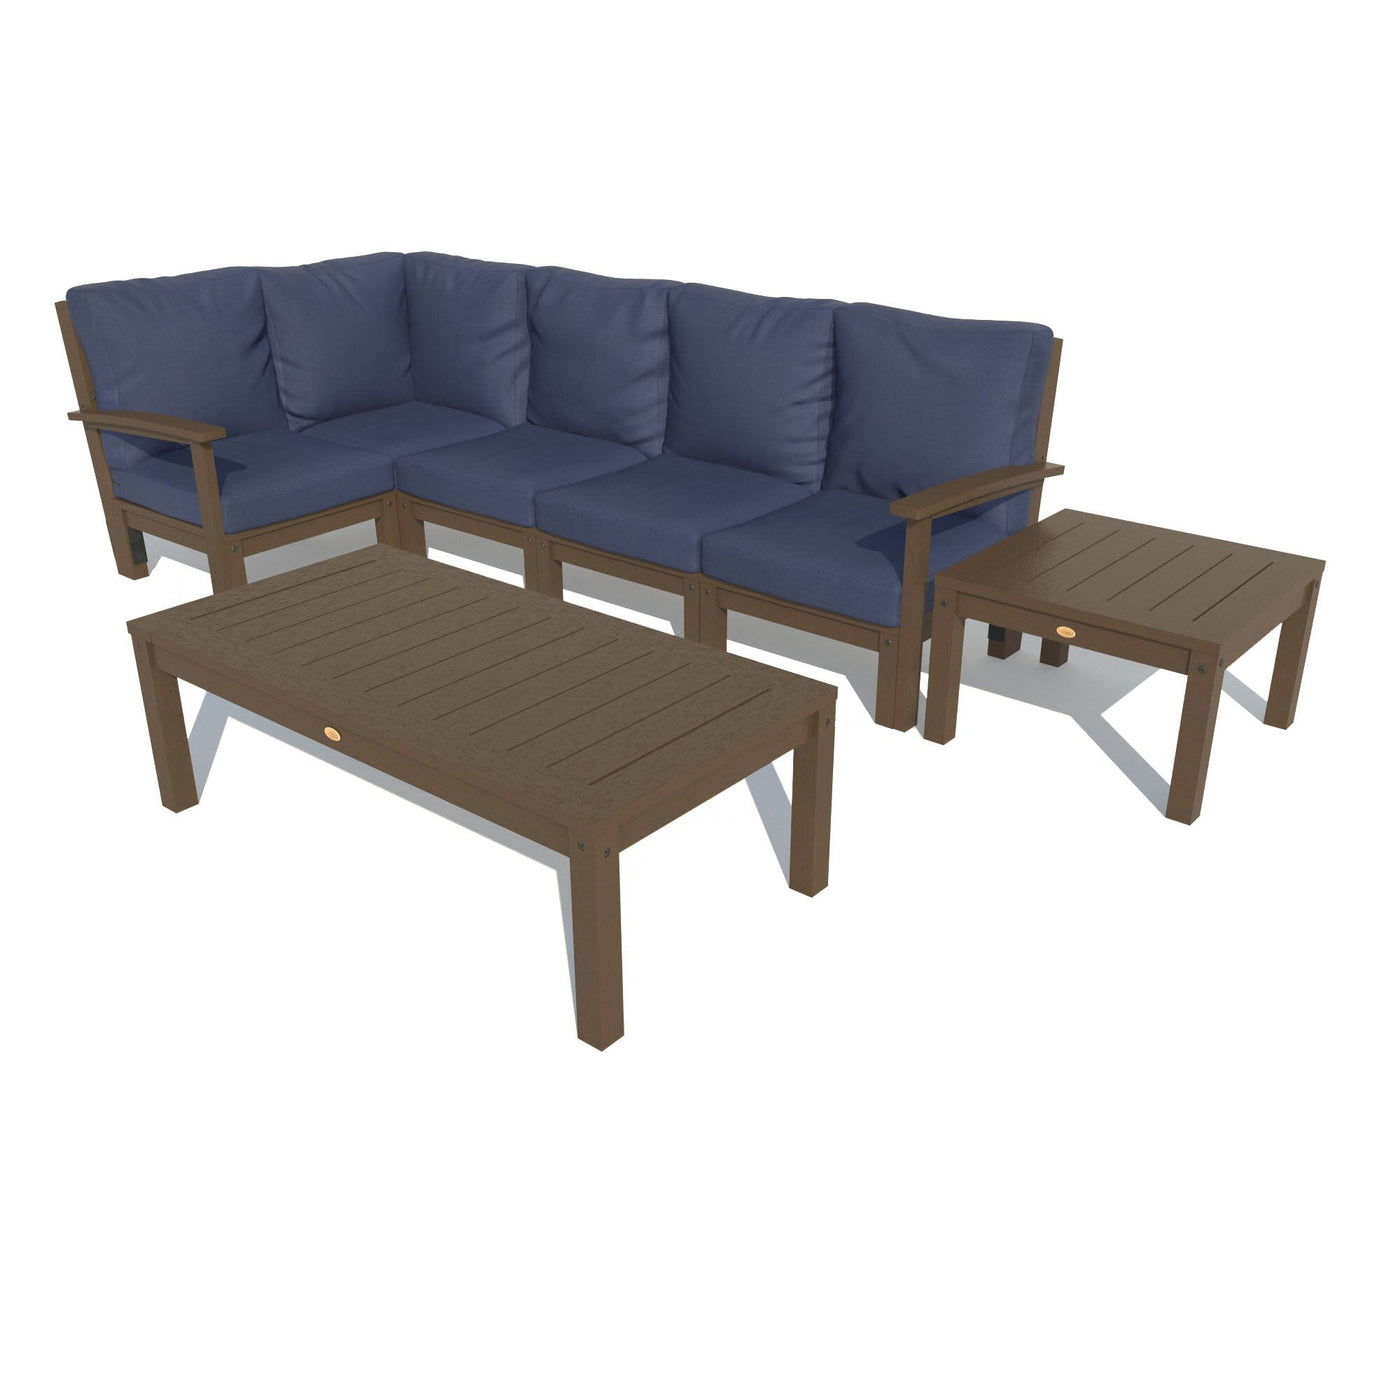 Bespoke Deep Seating: 7 Piece Sectional Set with Conversation and Side Table Deep Seating Highwood USA Navy Weathered Acorn 